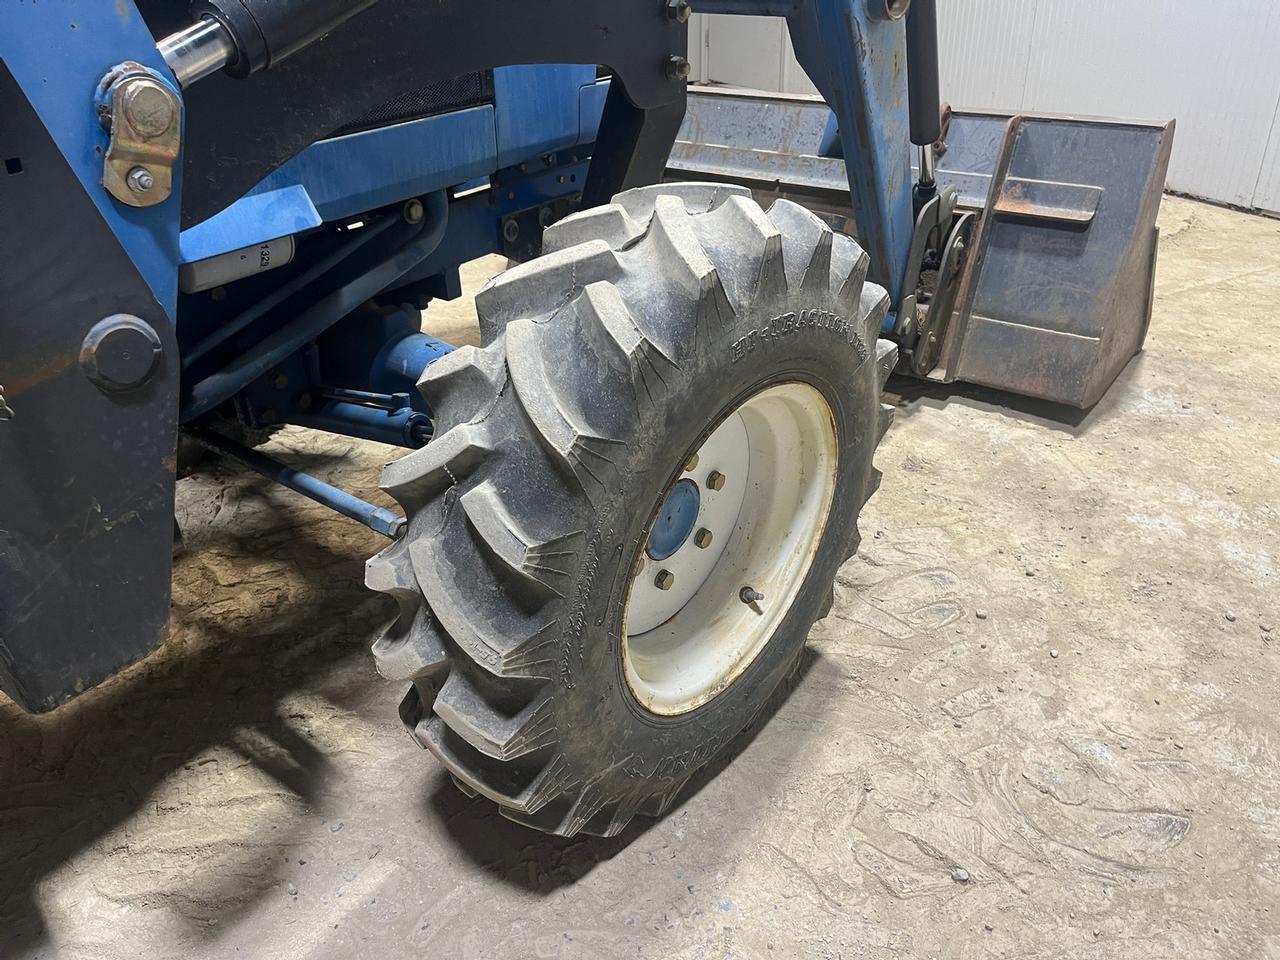 New Holland 2120 Tractor with Loader